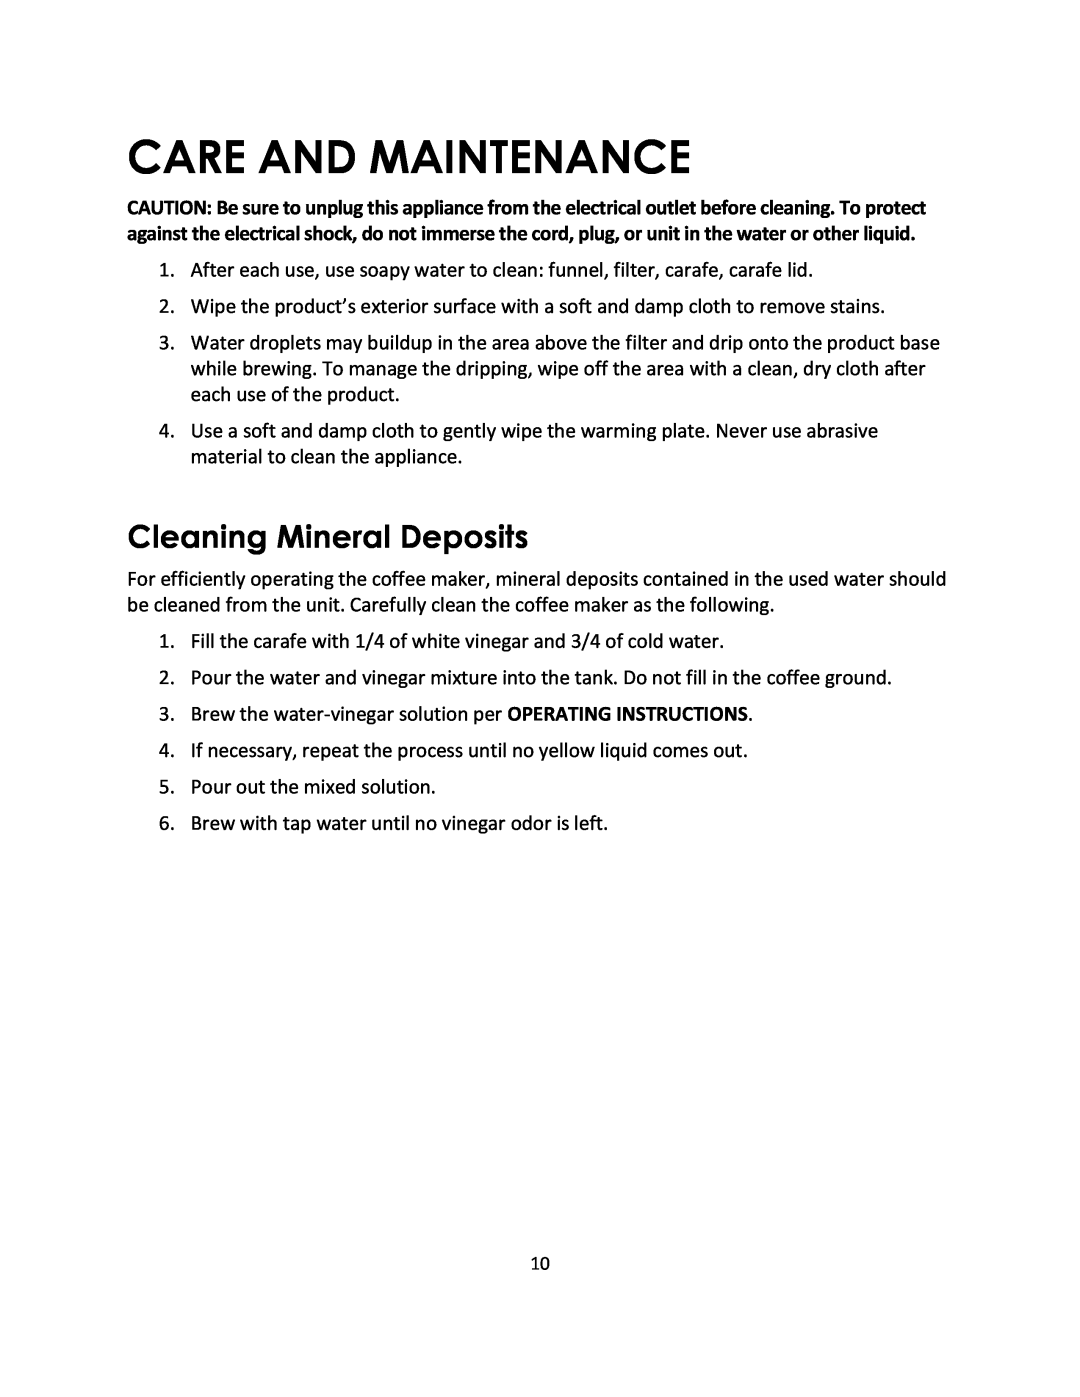 Magic Chef MCSCM12TB instruction manual Care And Maintenance, Cleaning Mineral Deposits 